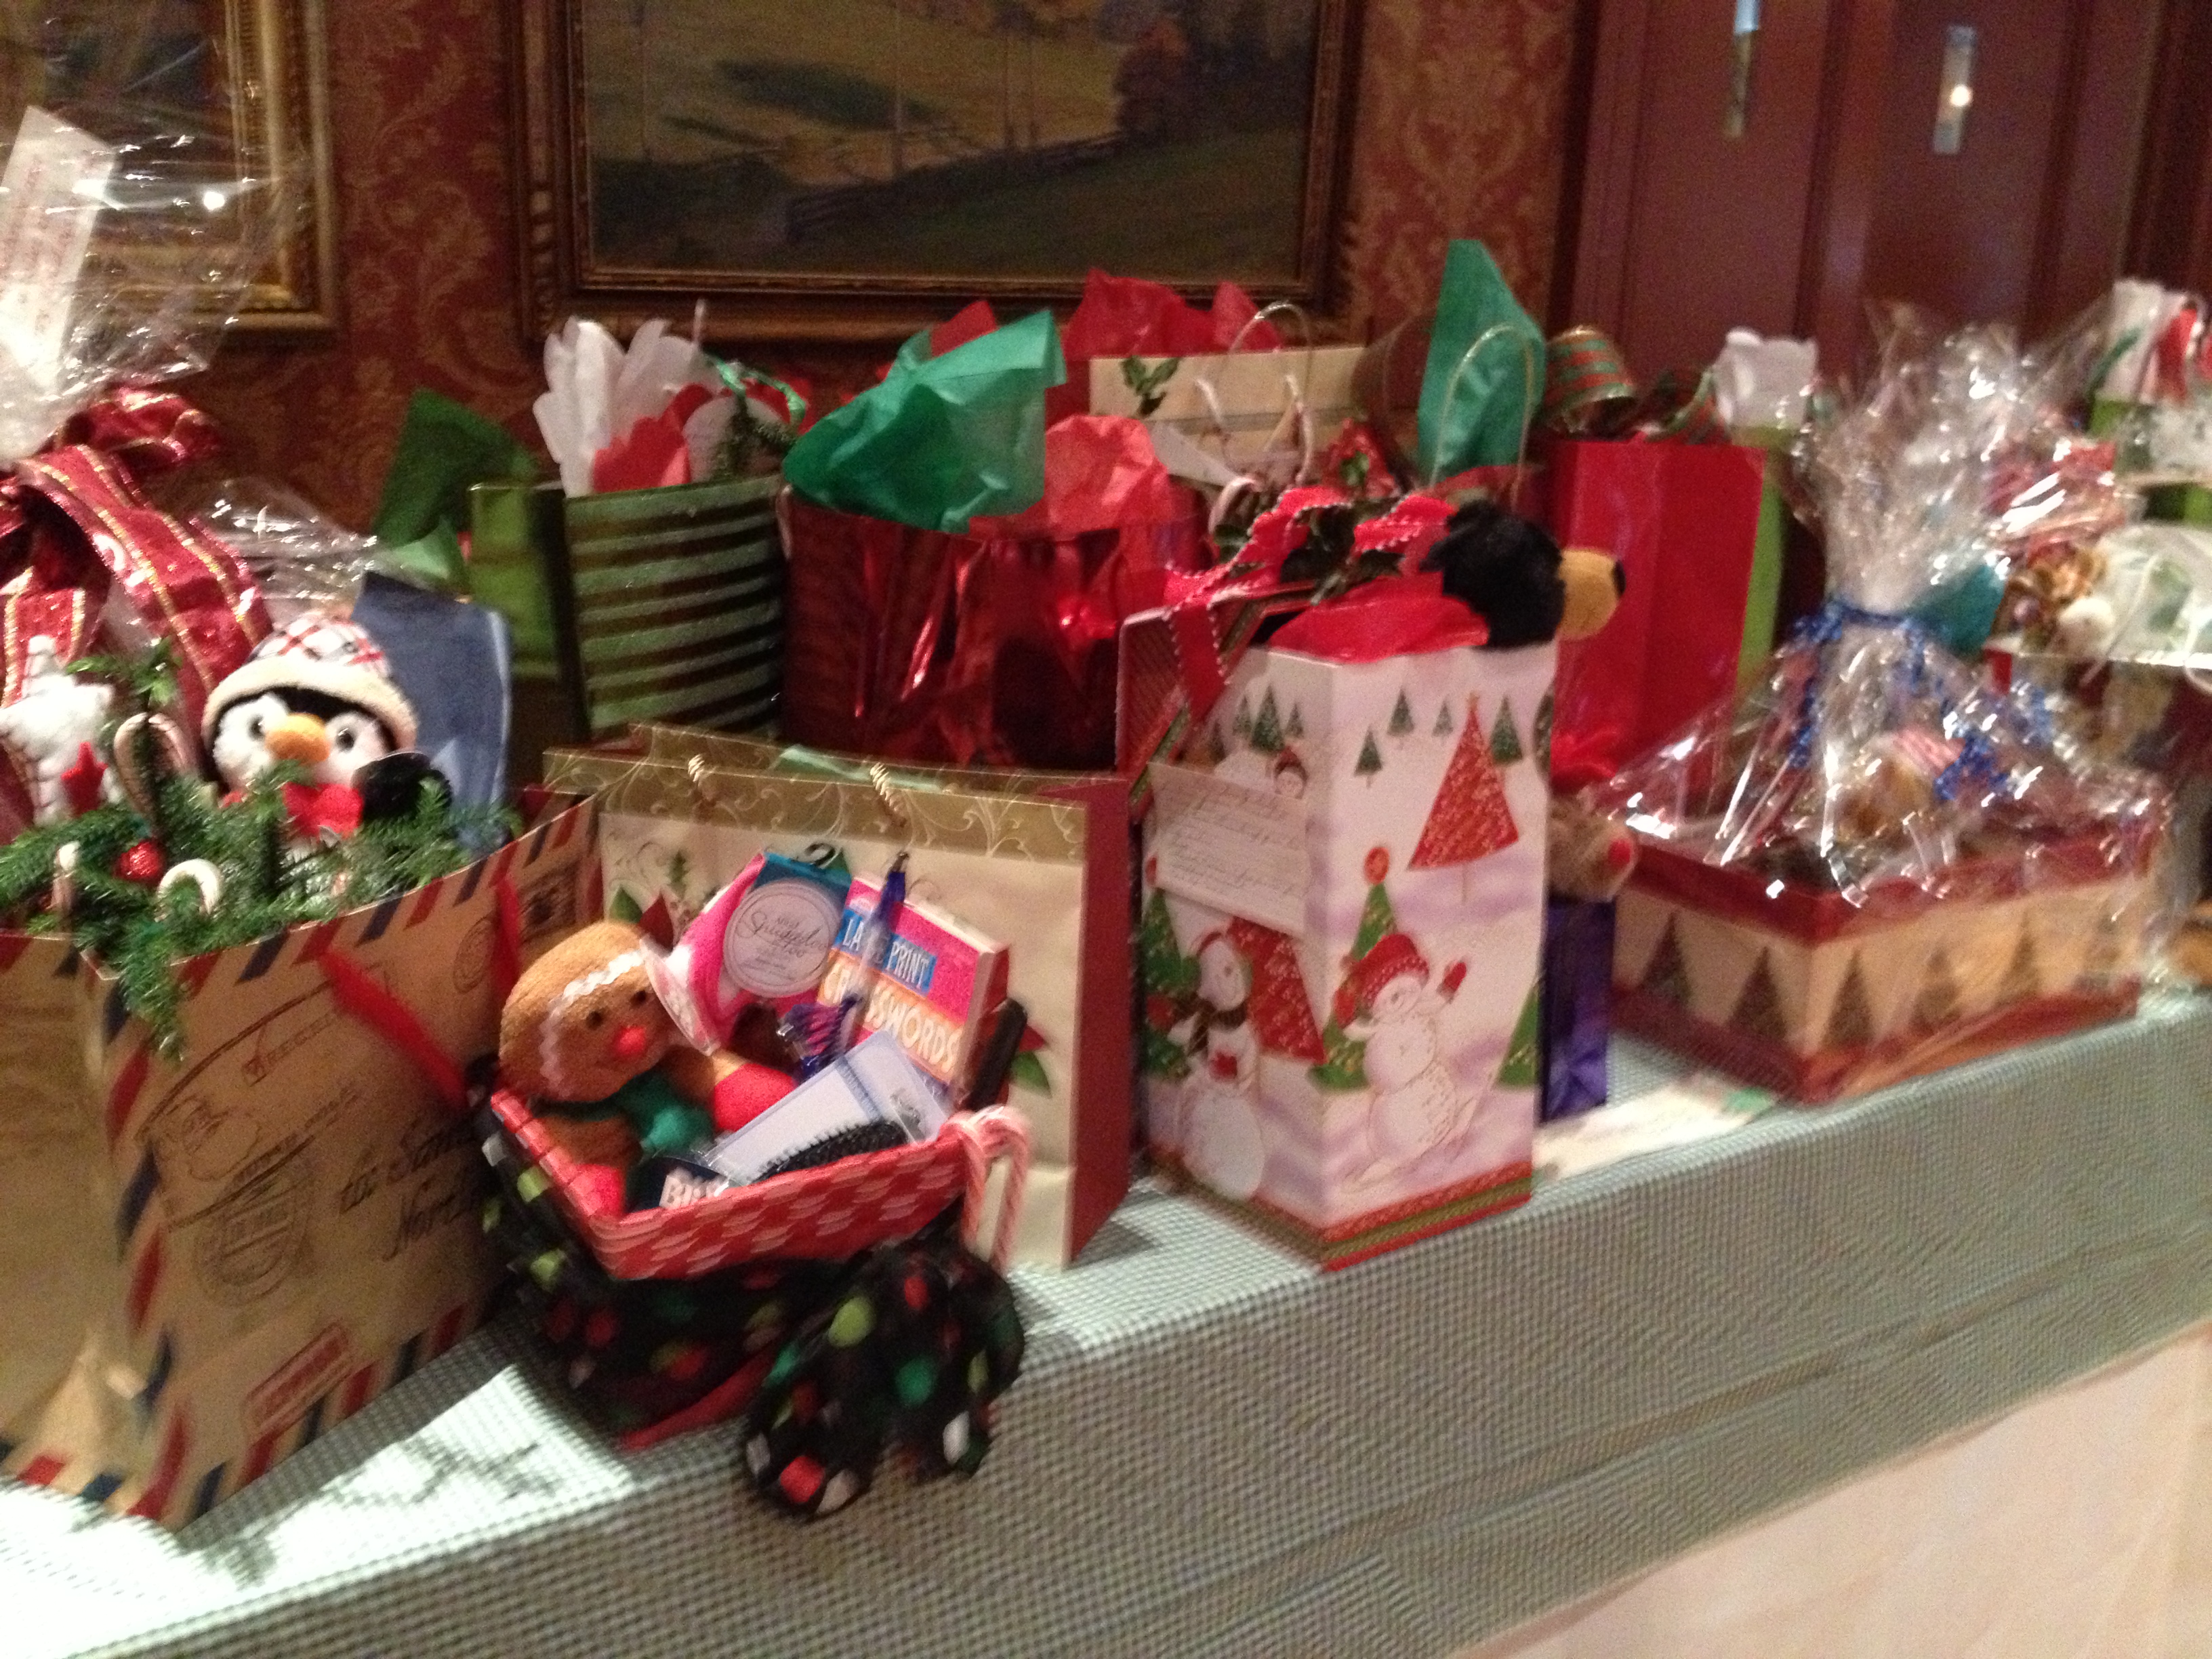  Holiday  Gifts for Nursing  Home  and Care  Facilities 